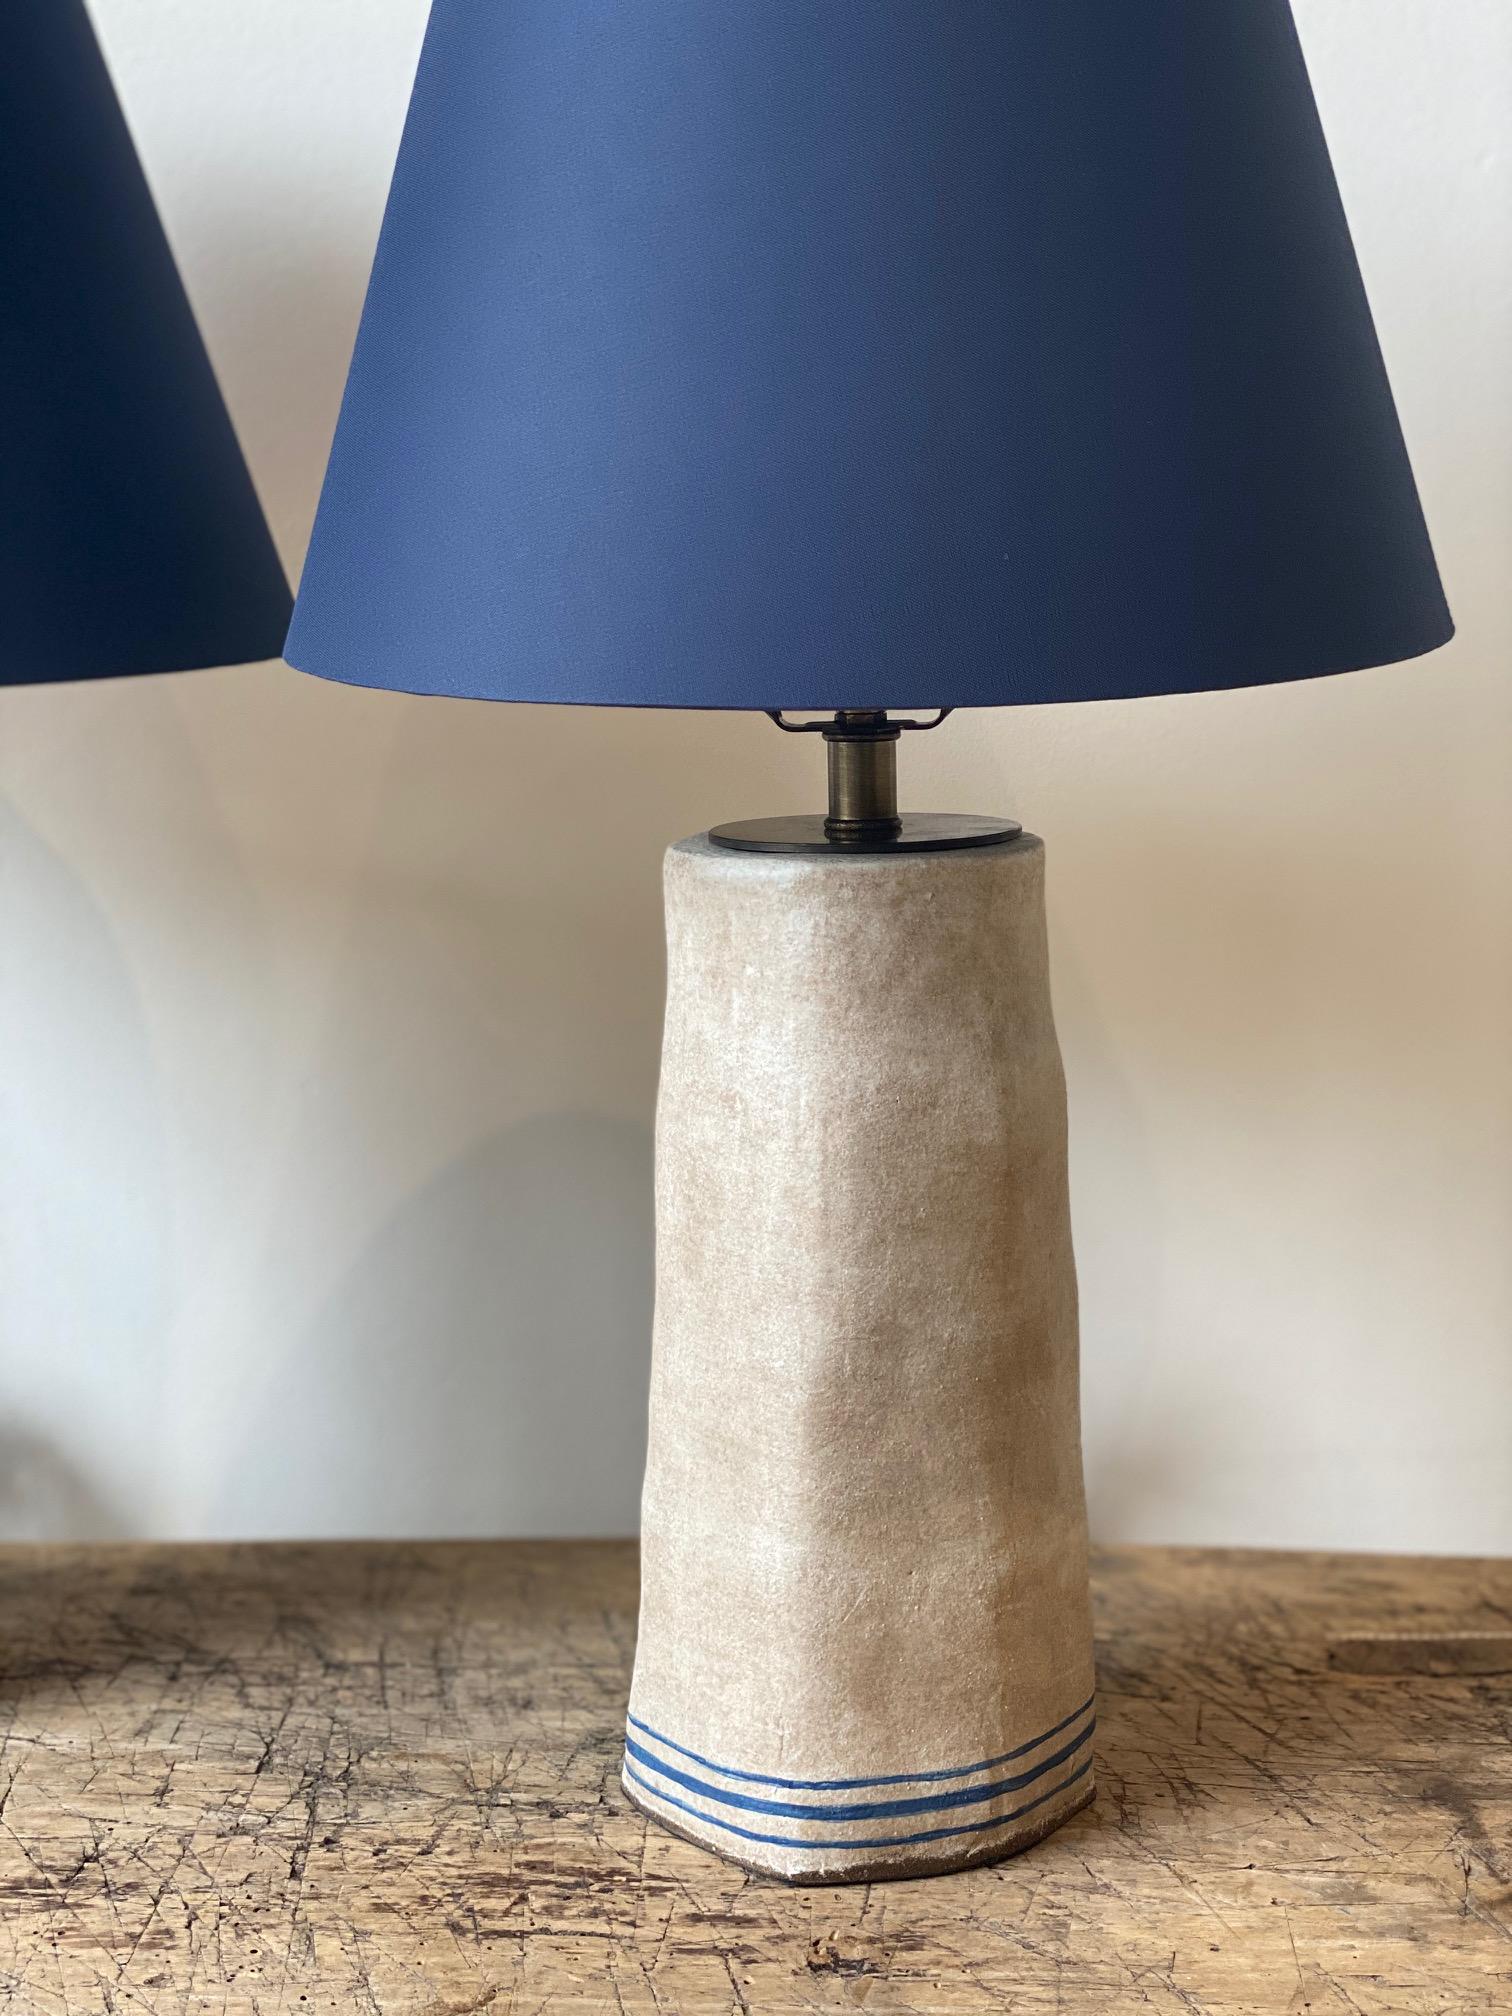 Handmade lamp bases by the French American artist Alix Soubiran. The lamps come with brown twist cord. Sold as a pair, navy custom bookcloth shade included.

The lamp base measures 11